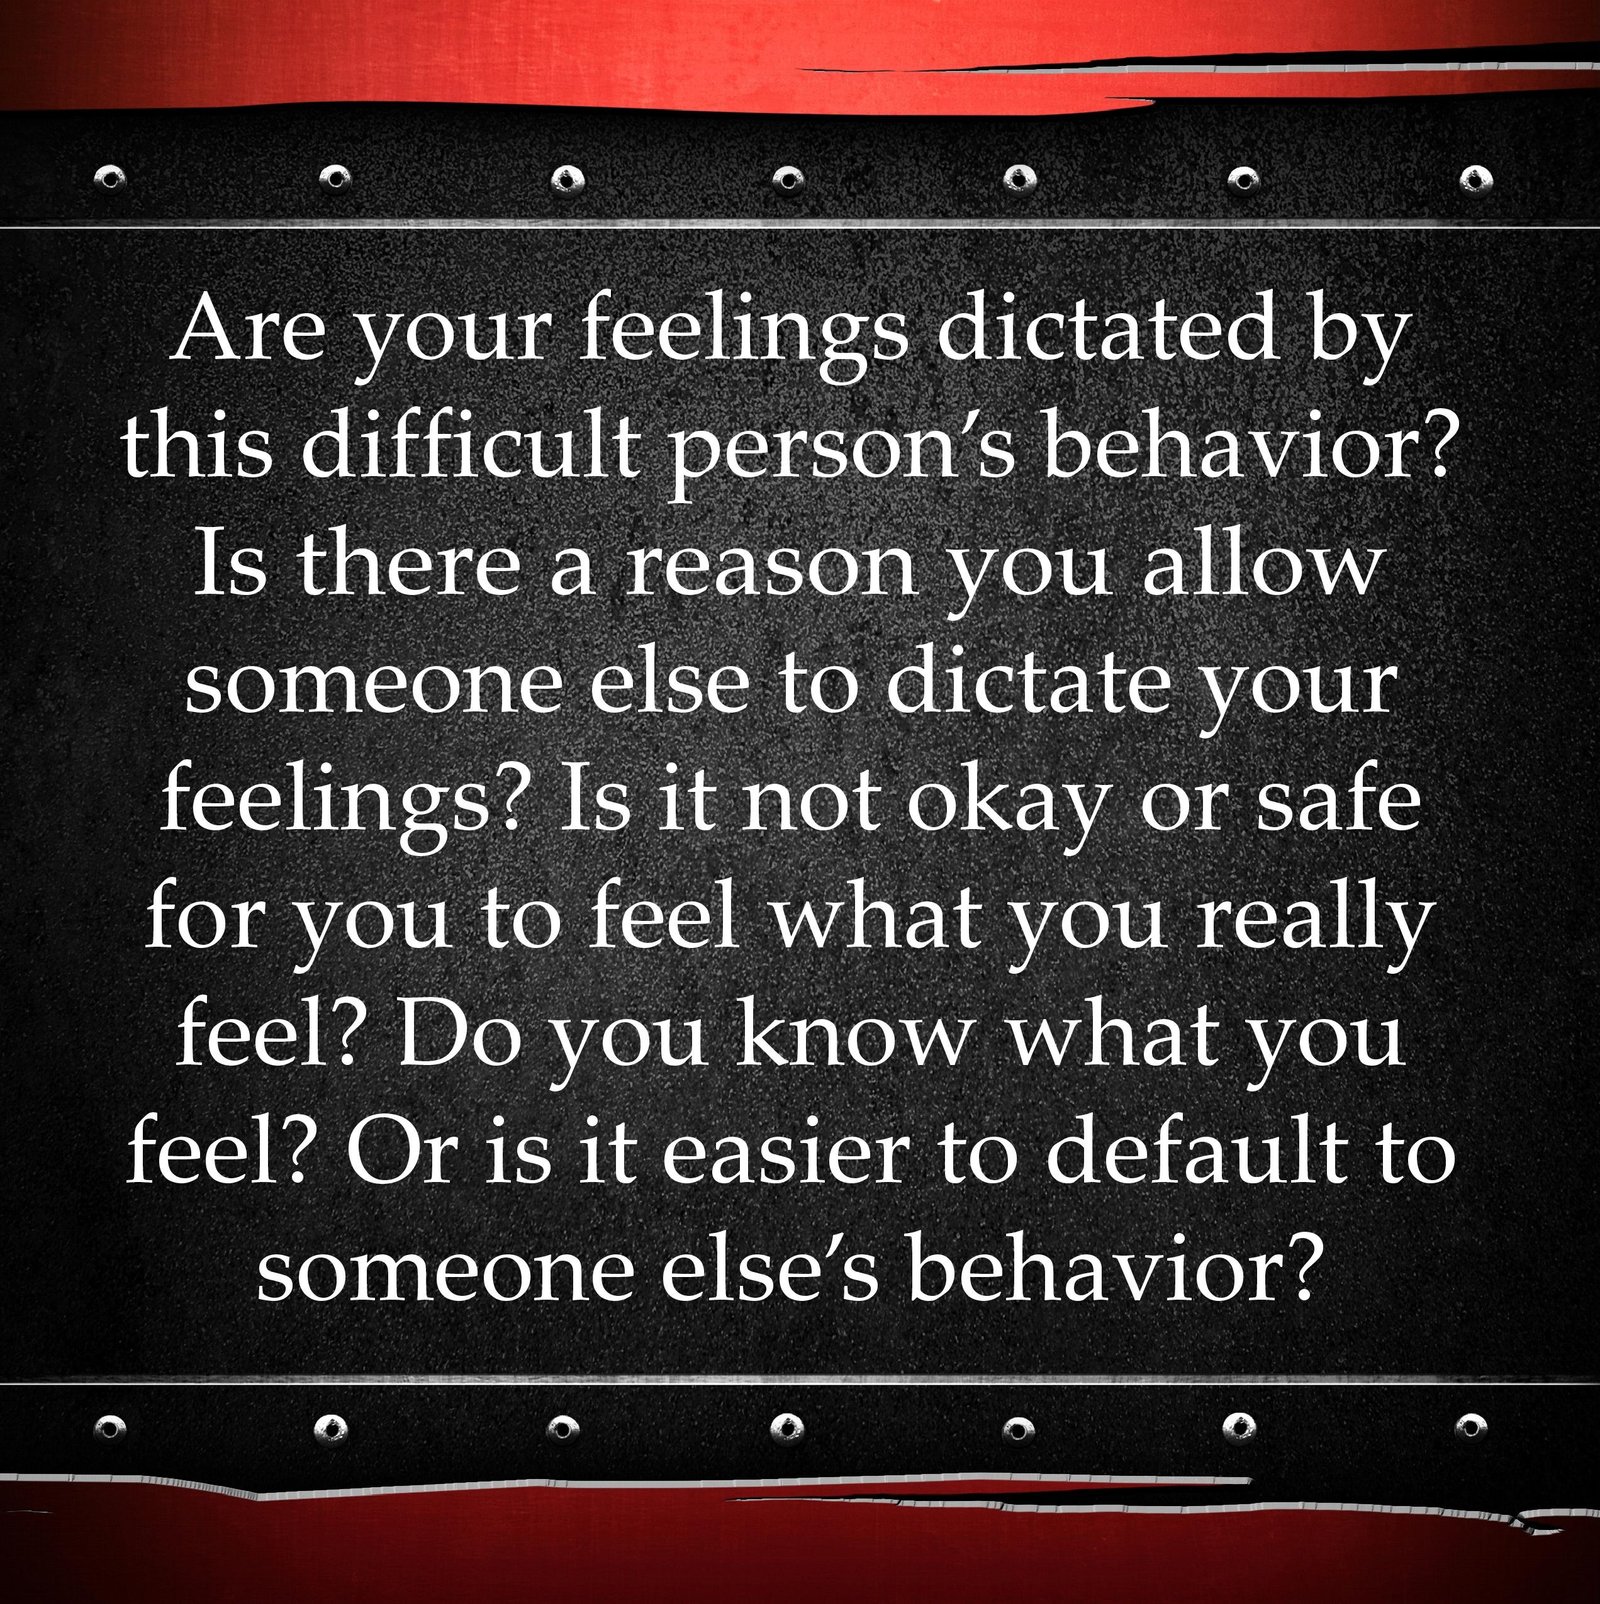 Are your feeling dictated by this difficult person's behavior